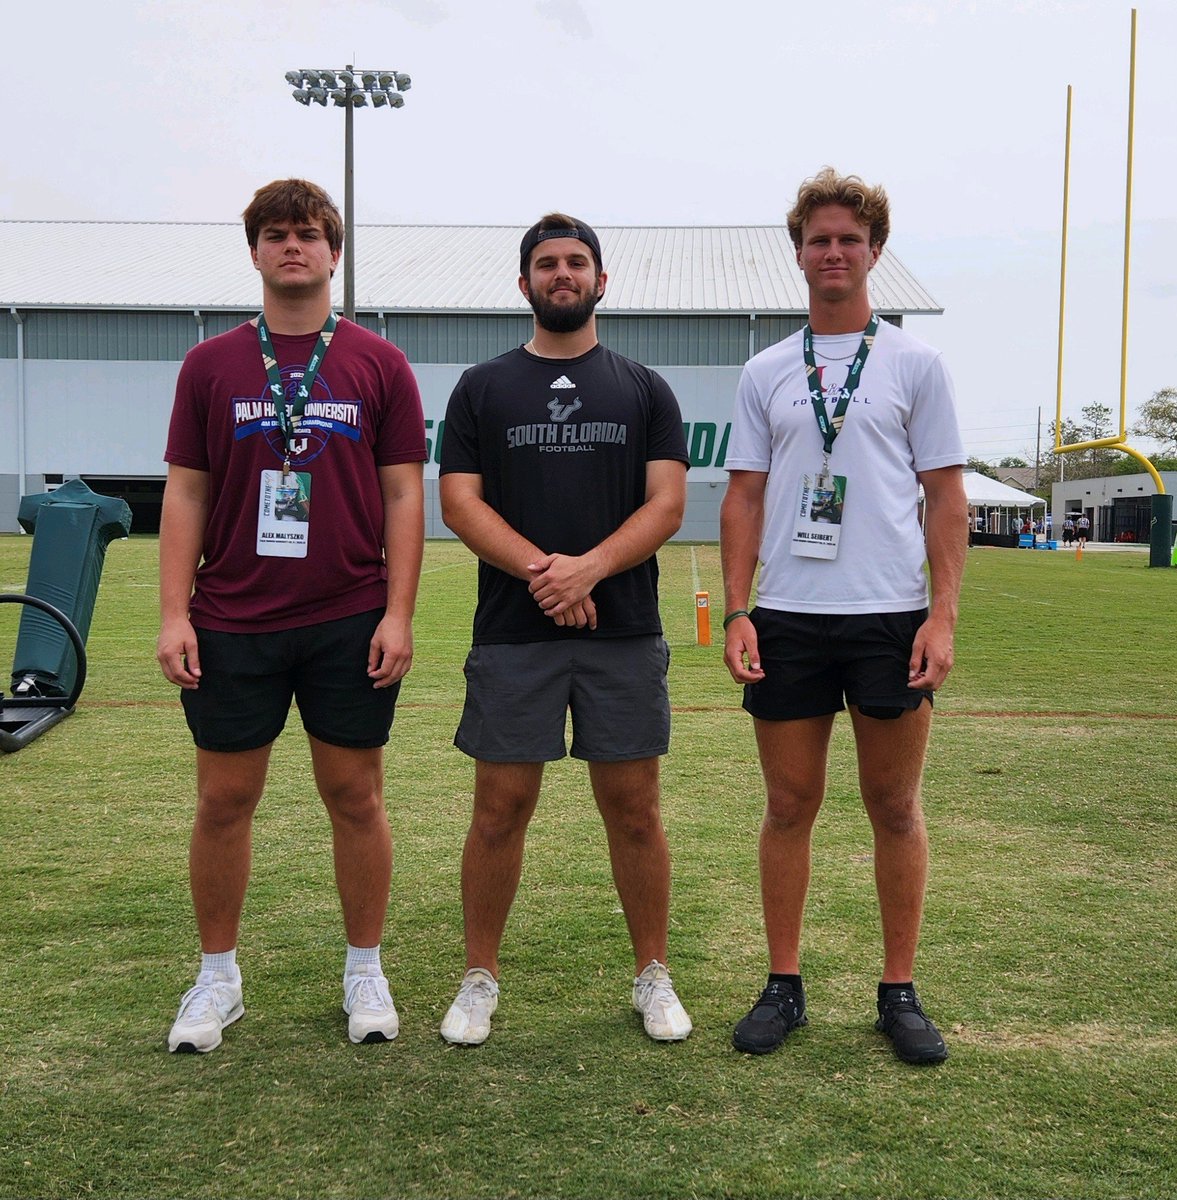 Educational/Exceptional day at @USFFootball Thank you @CoachGolesh @ToddOrlandoUSF @CoachBahler @ABOONE_USF @Ryland_powell Looking forward to seeing you again! @phufootball